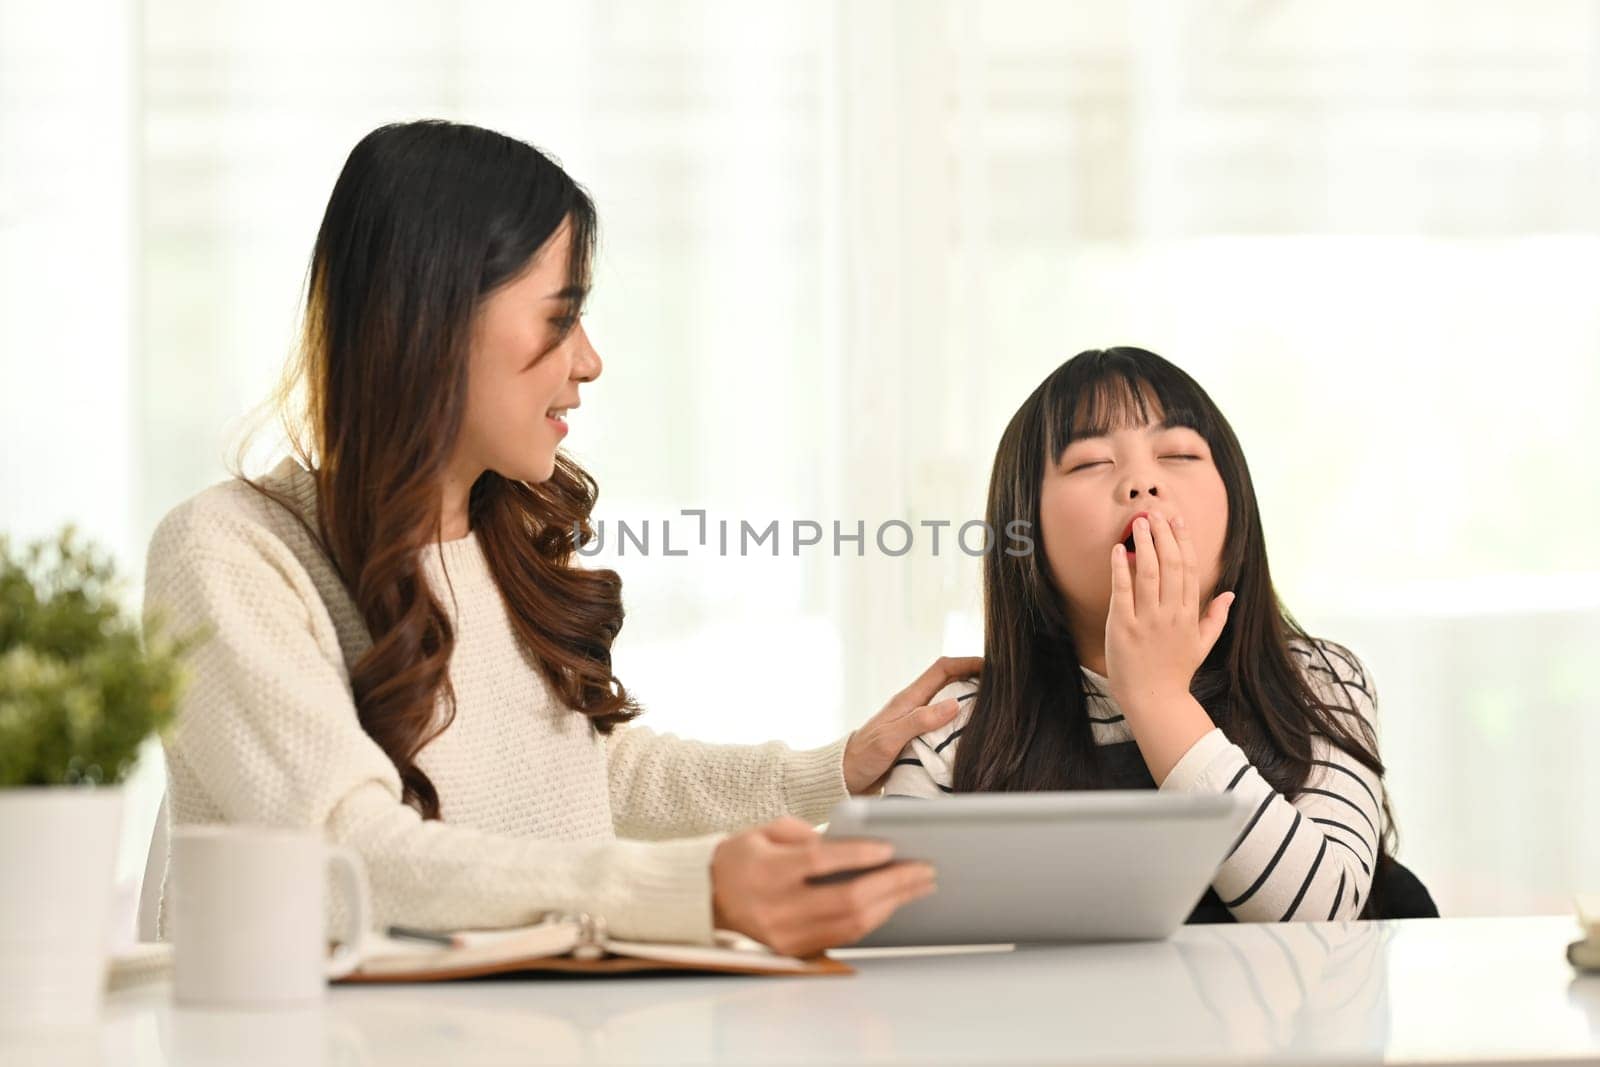 Shot of sleepy little girl yawning, covering mouth with hand during doing homework at home with her mother.